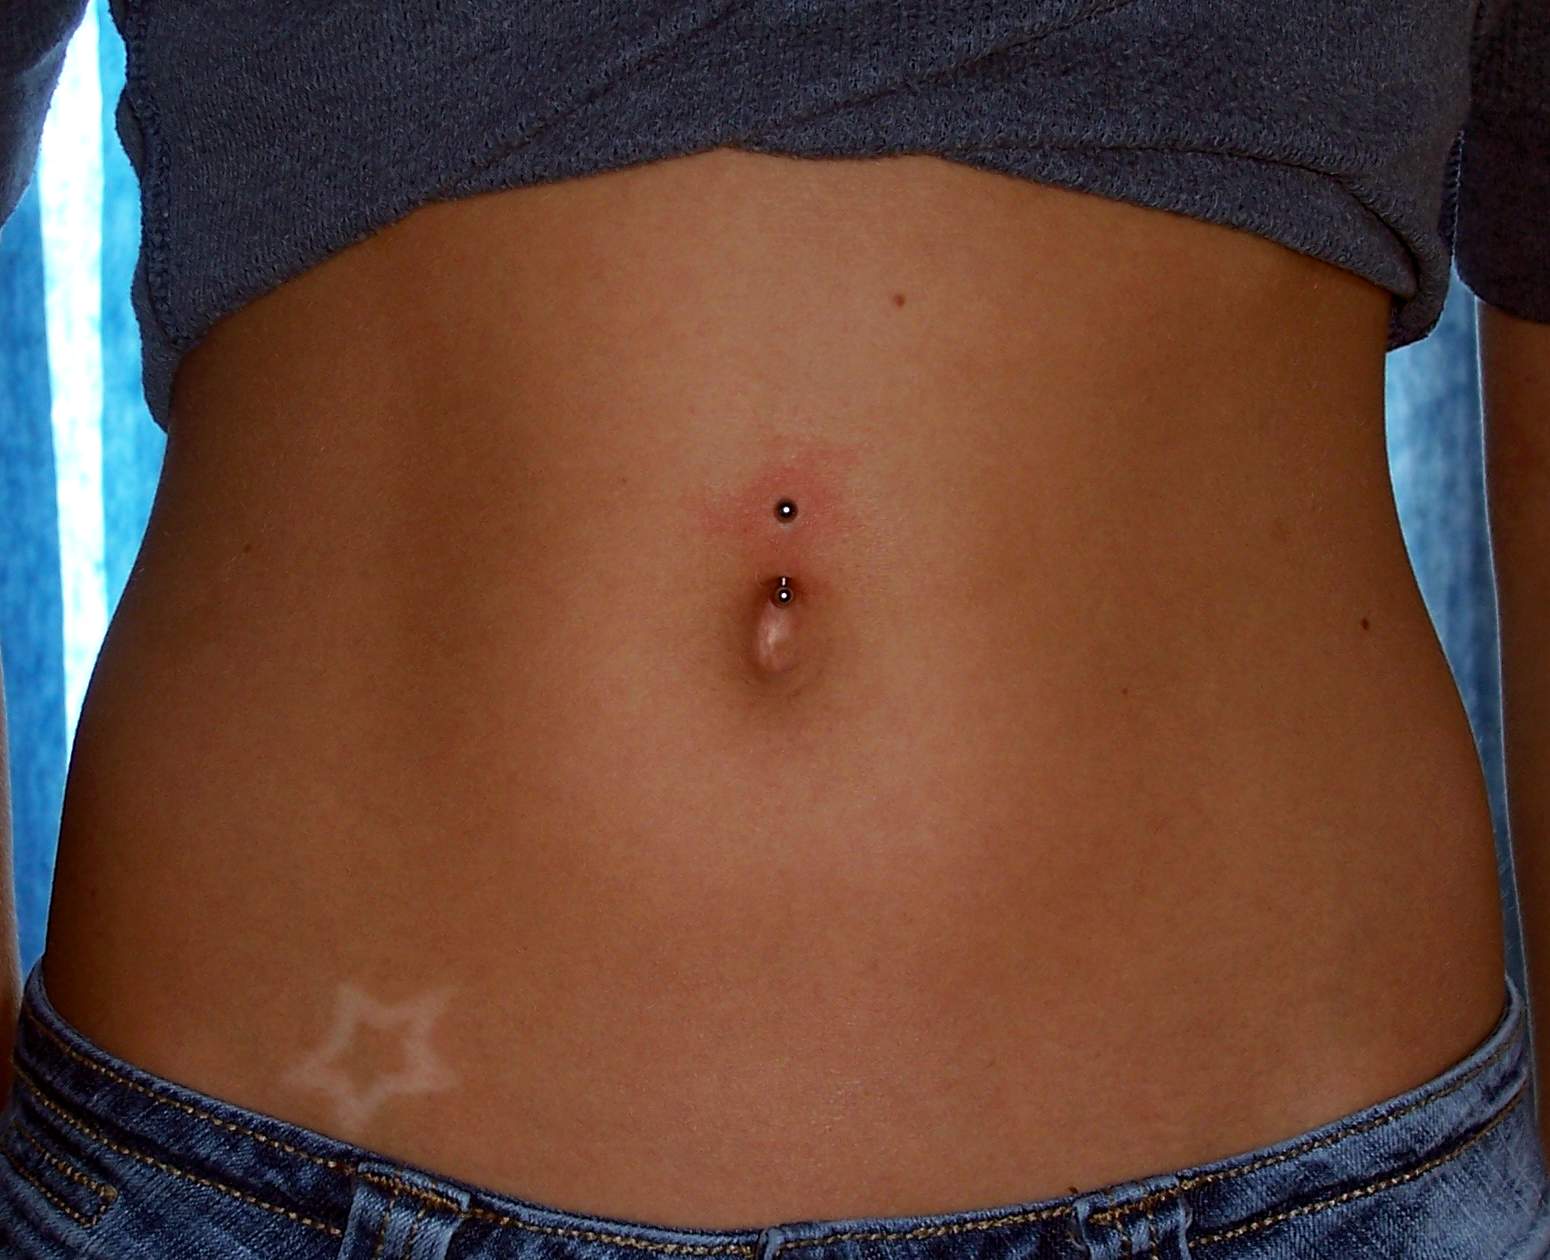 Star Hip Tattoo And Silver Barbell Navel Piercing